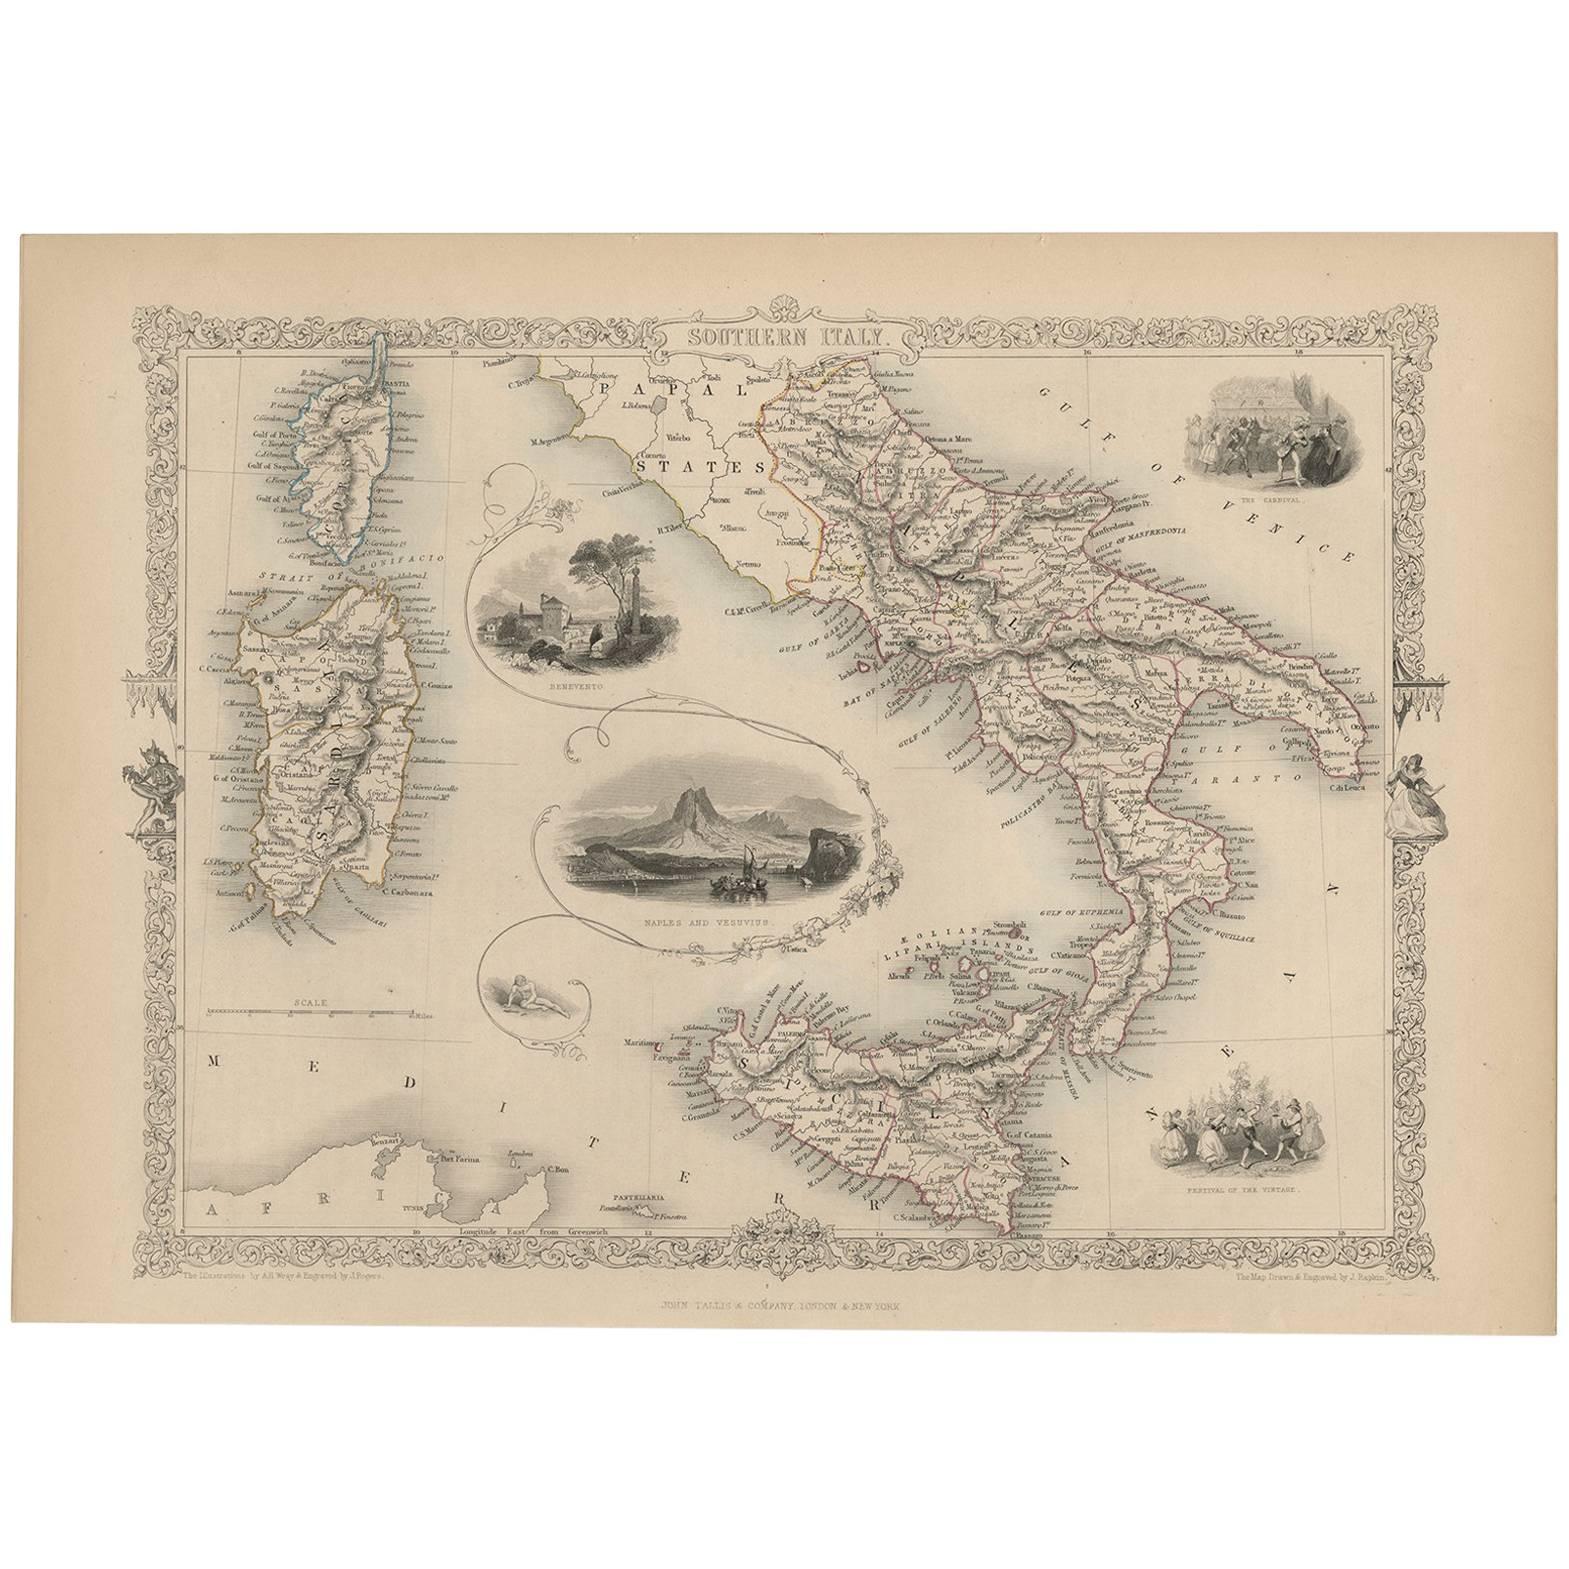 Antique Map of Southern Italy by J. Tallis, circa 1851